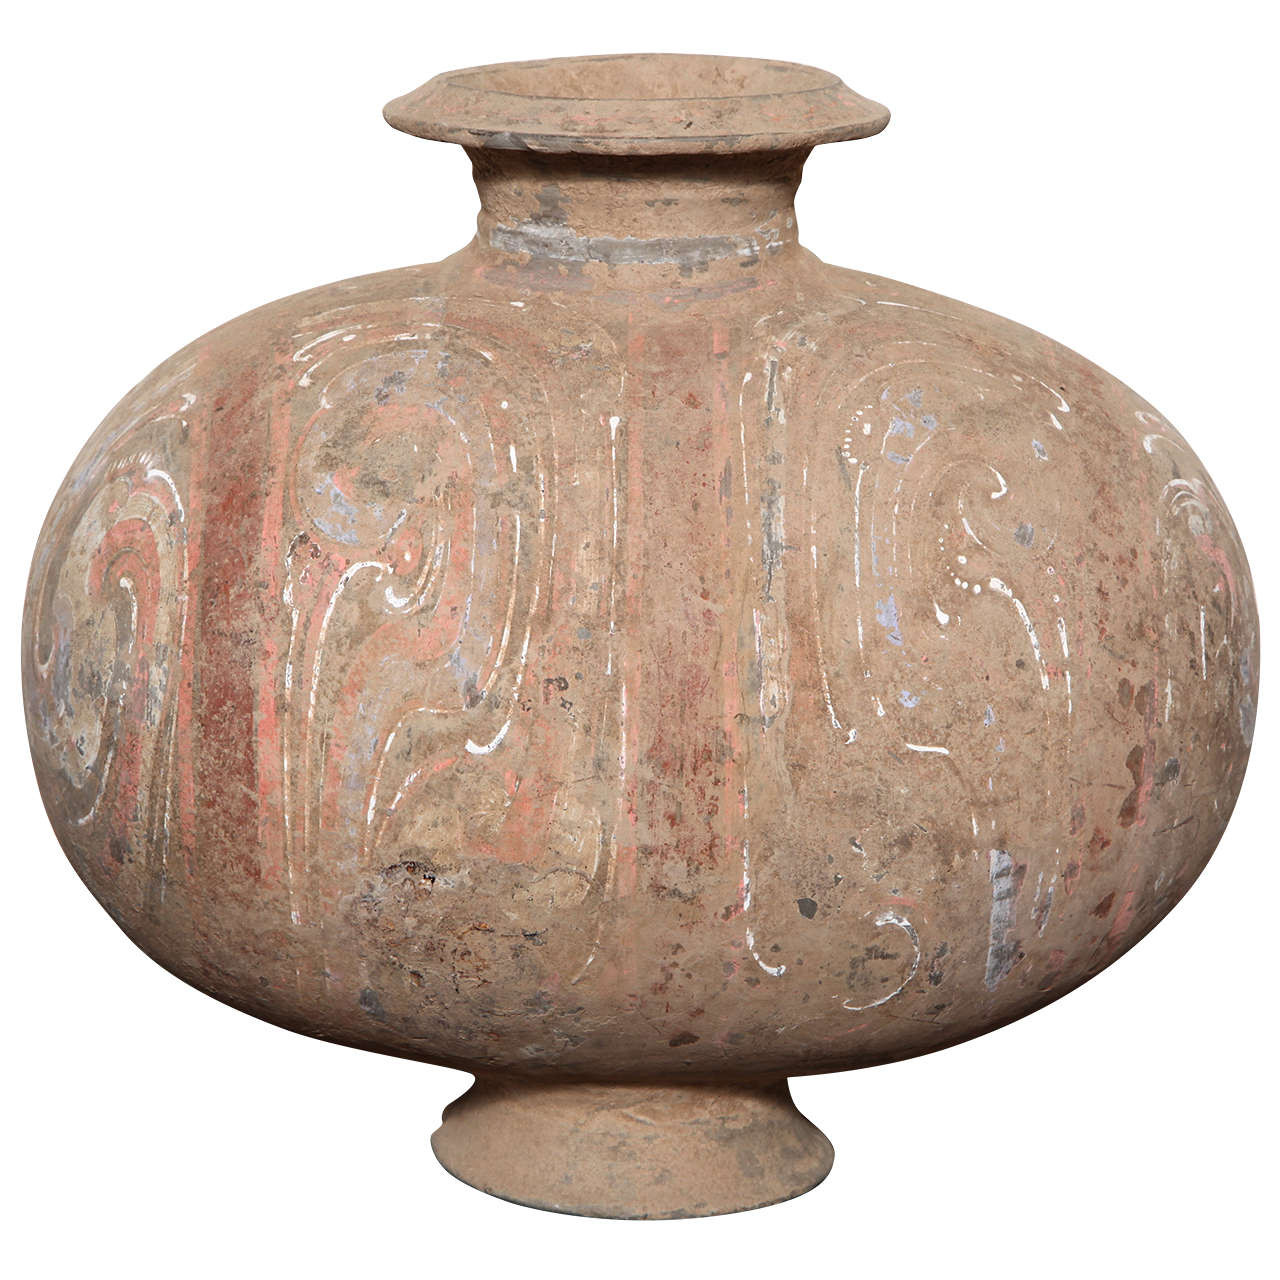 12 Famous Han Dynasty Vase 2024 free download han dynasty vase of chinese han dynasty painted pottery cocoon jar for sale at 1stdibs in 206 bc 200 ad han dynasty antique terracotta silk cocoon jar with original paint